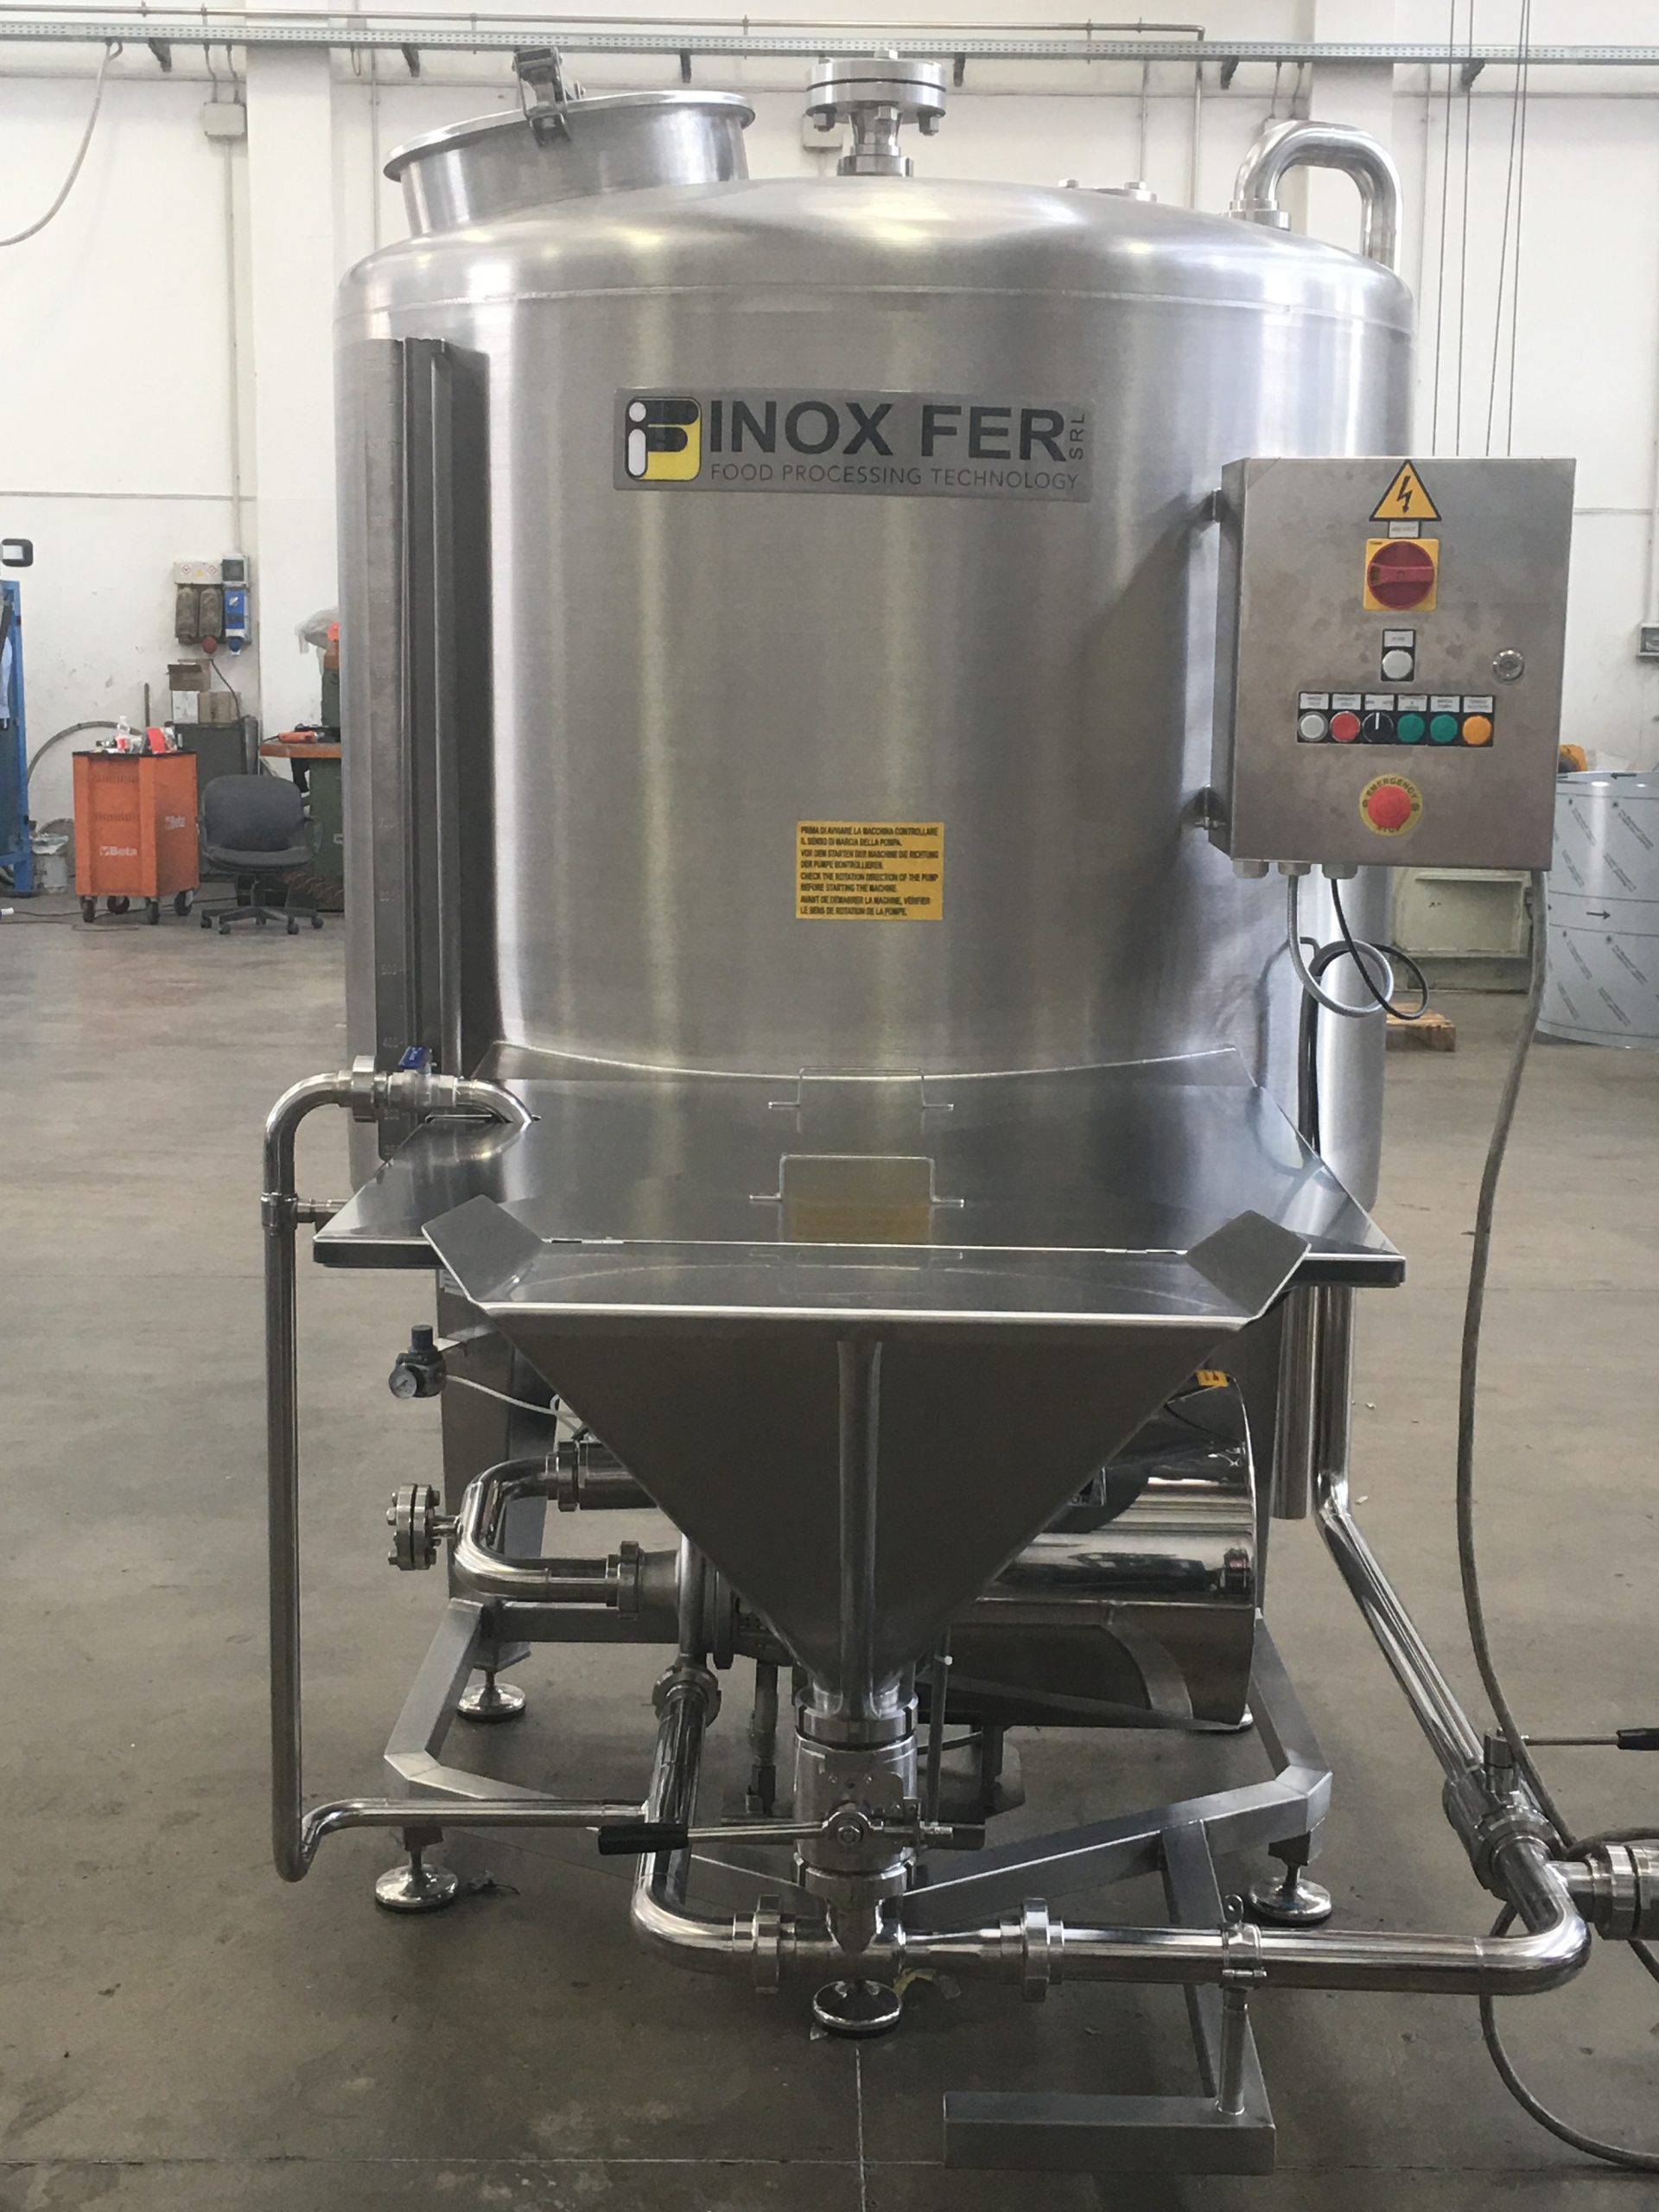 Dispersion of polymers in water with Inox-Fer mixers